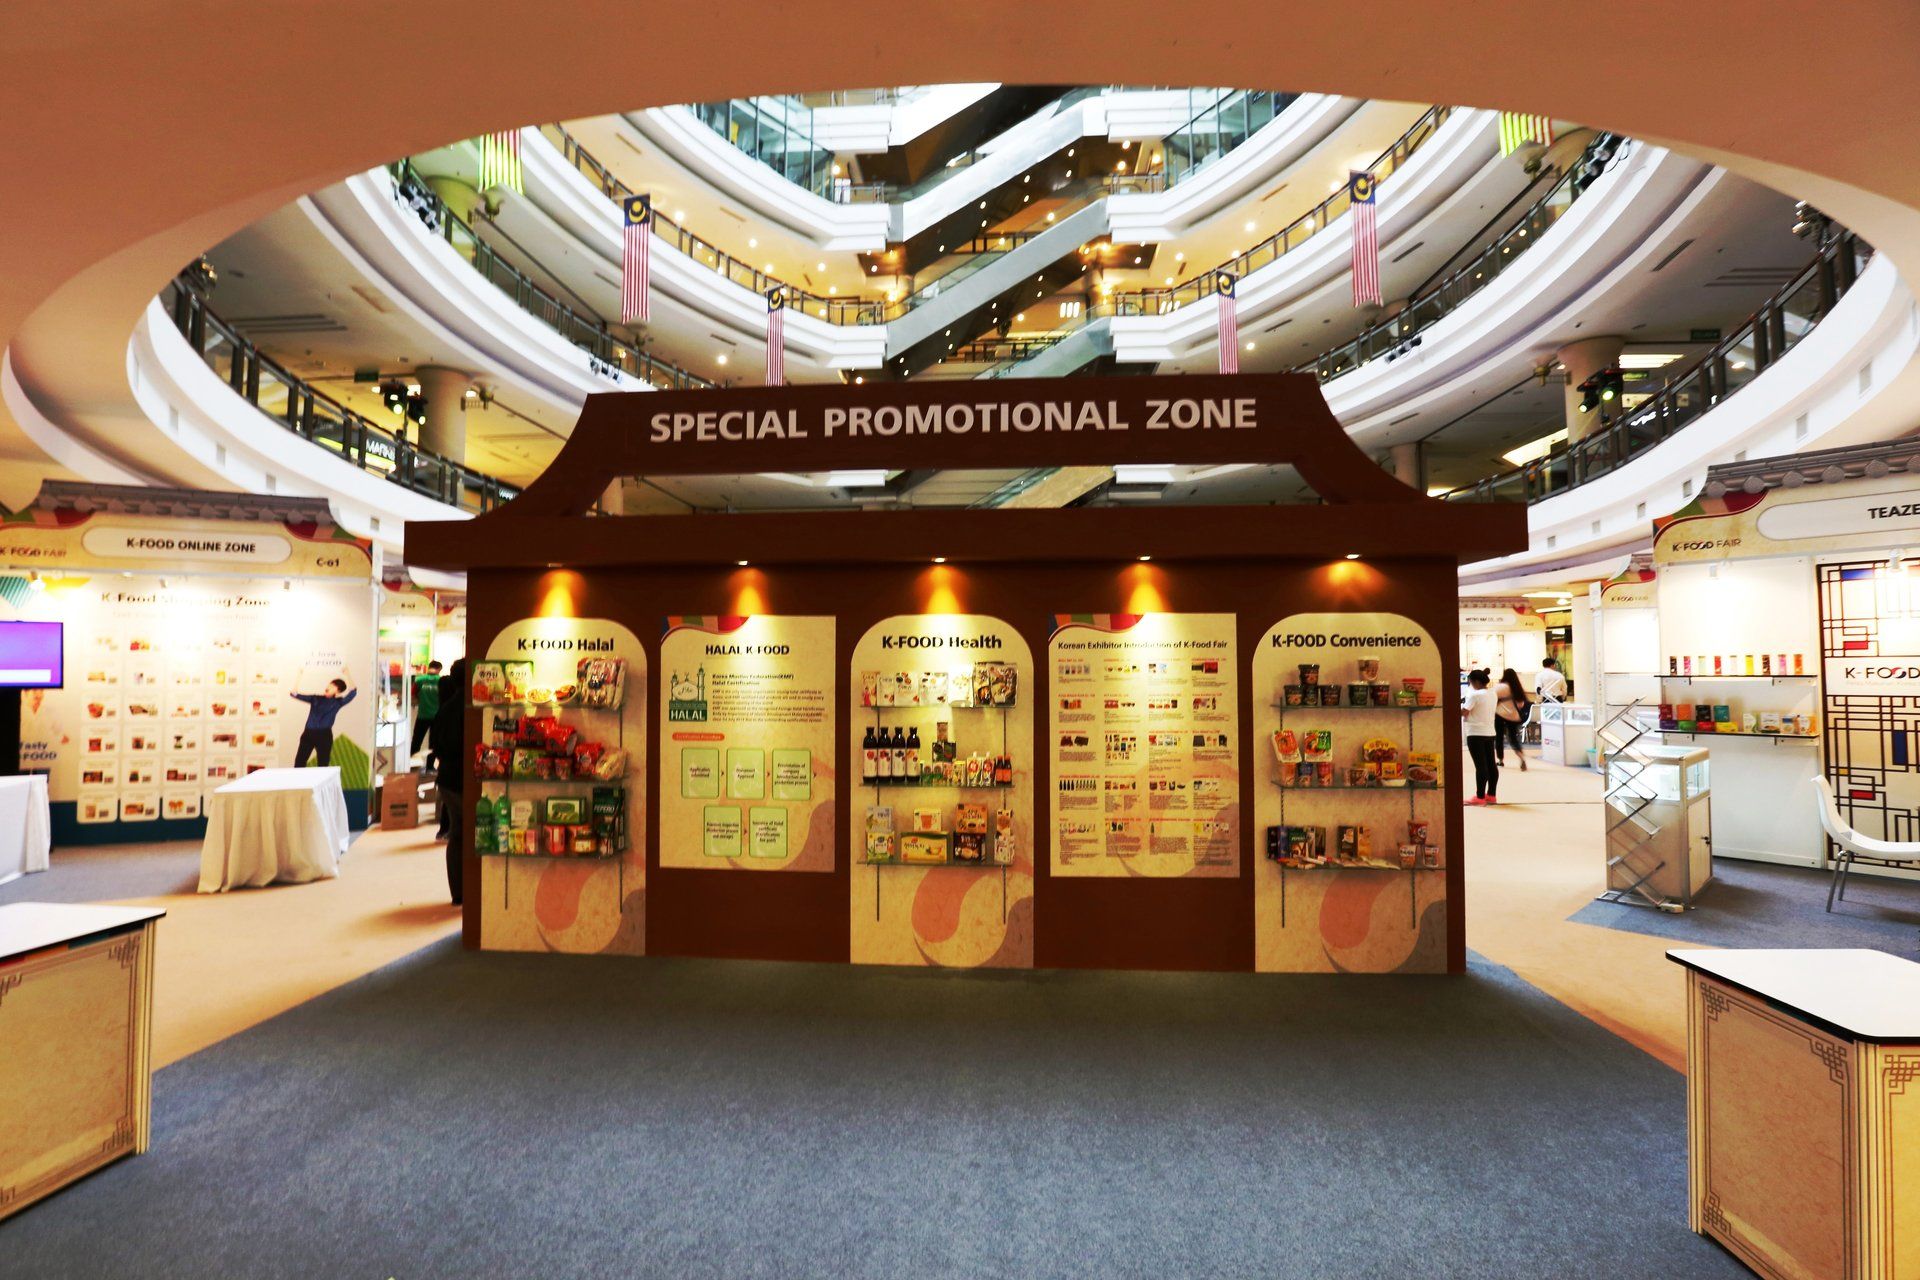 K-Food Fair 2016 @ Malaysia. Booth designed and built by Essential Global Fairs.